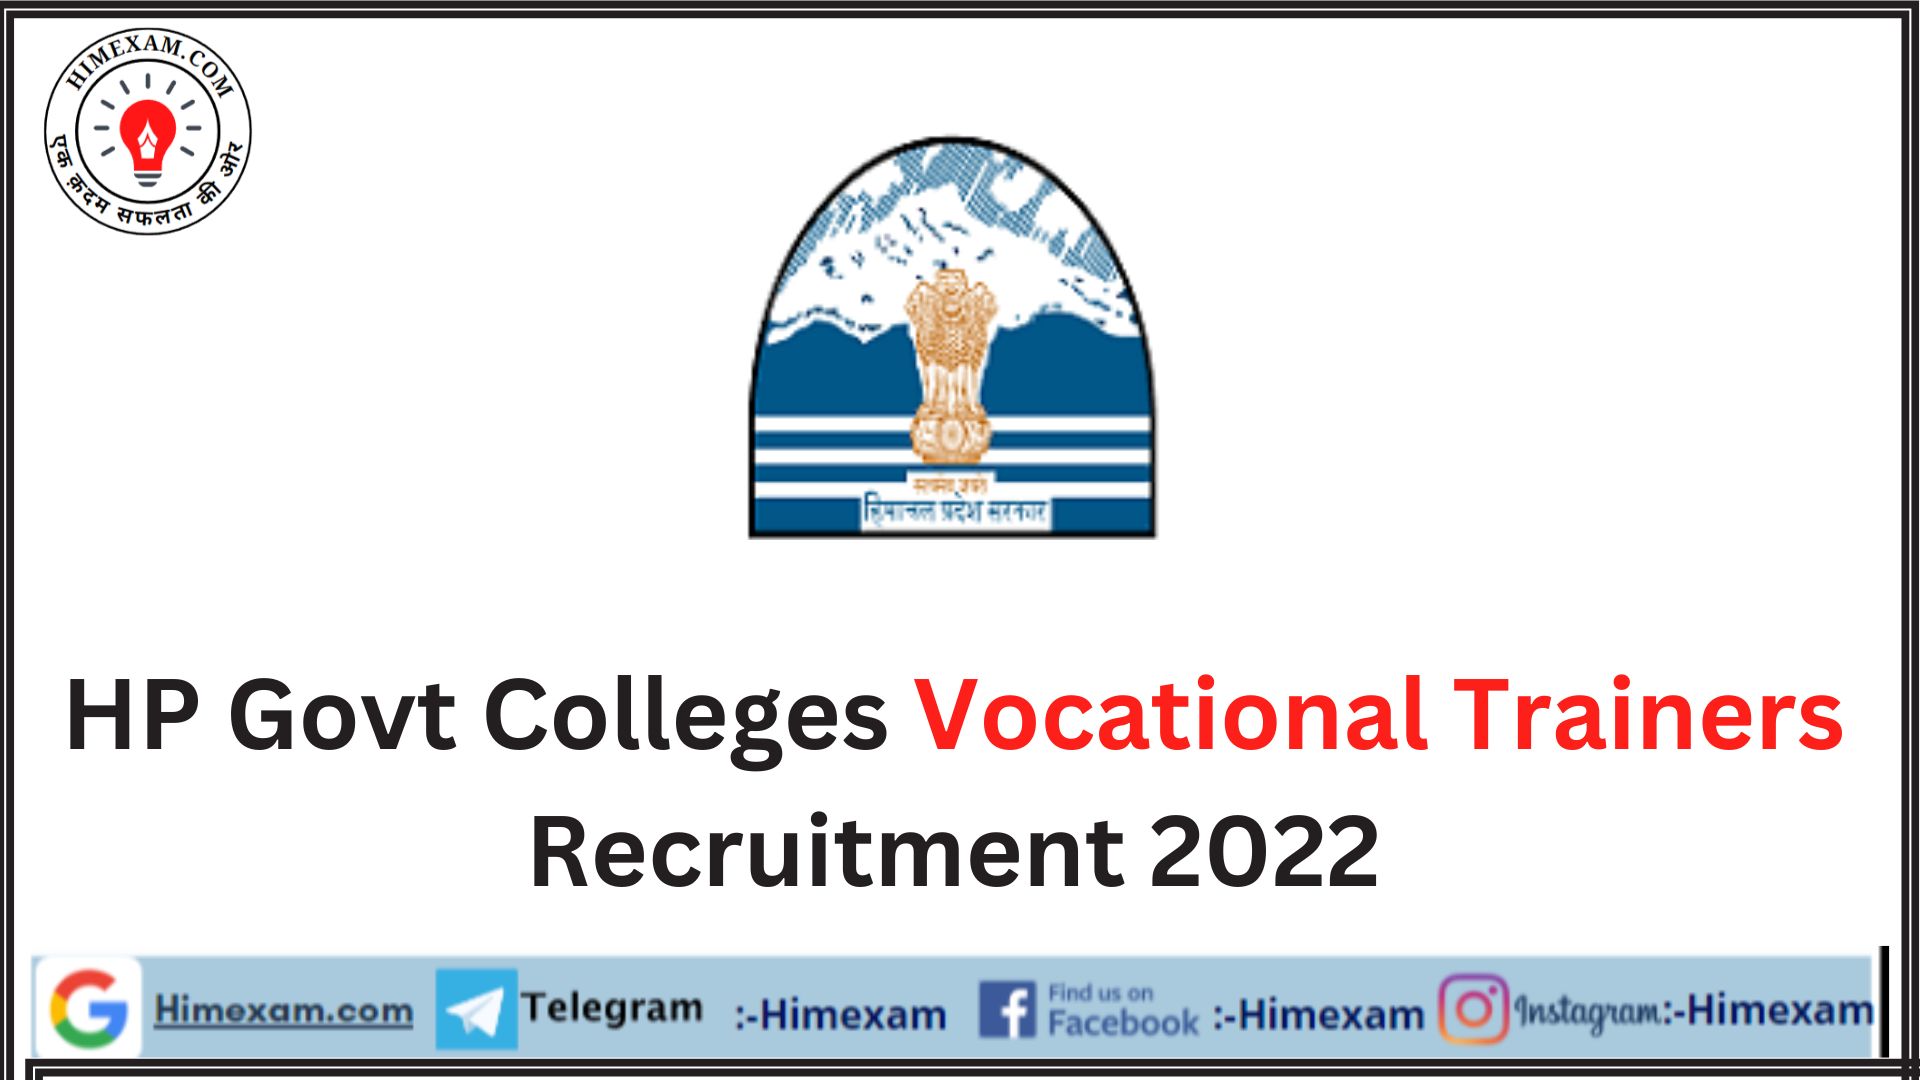 HP Govt Colleges Vocational Trainers Recruitment 2022